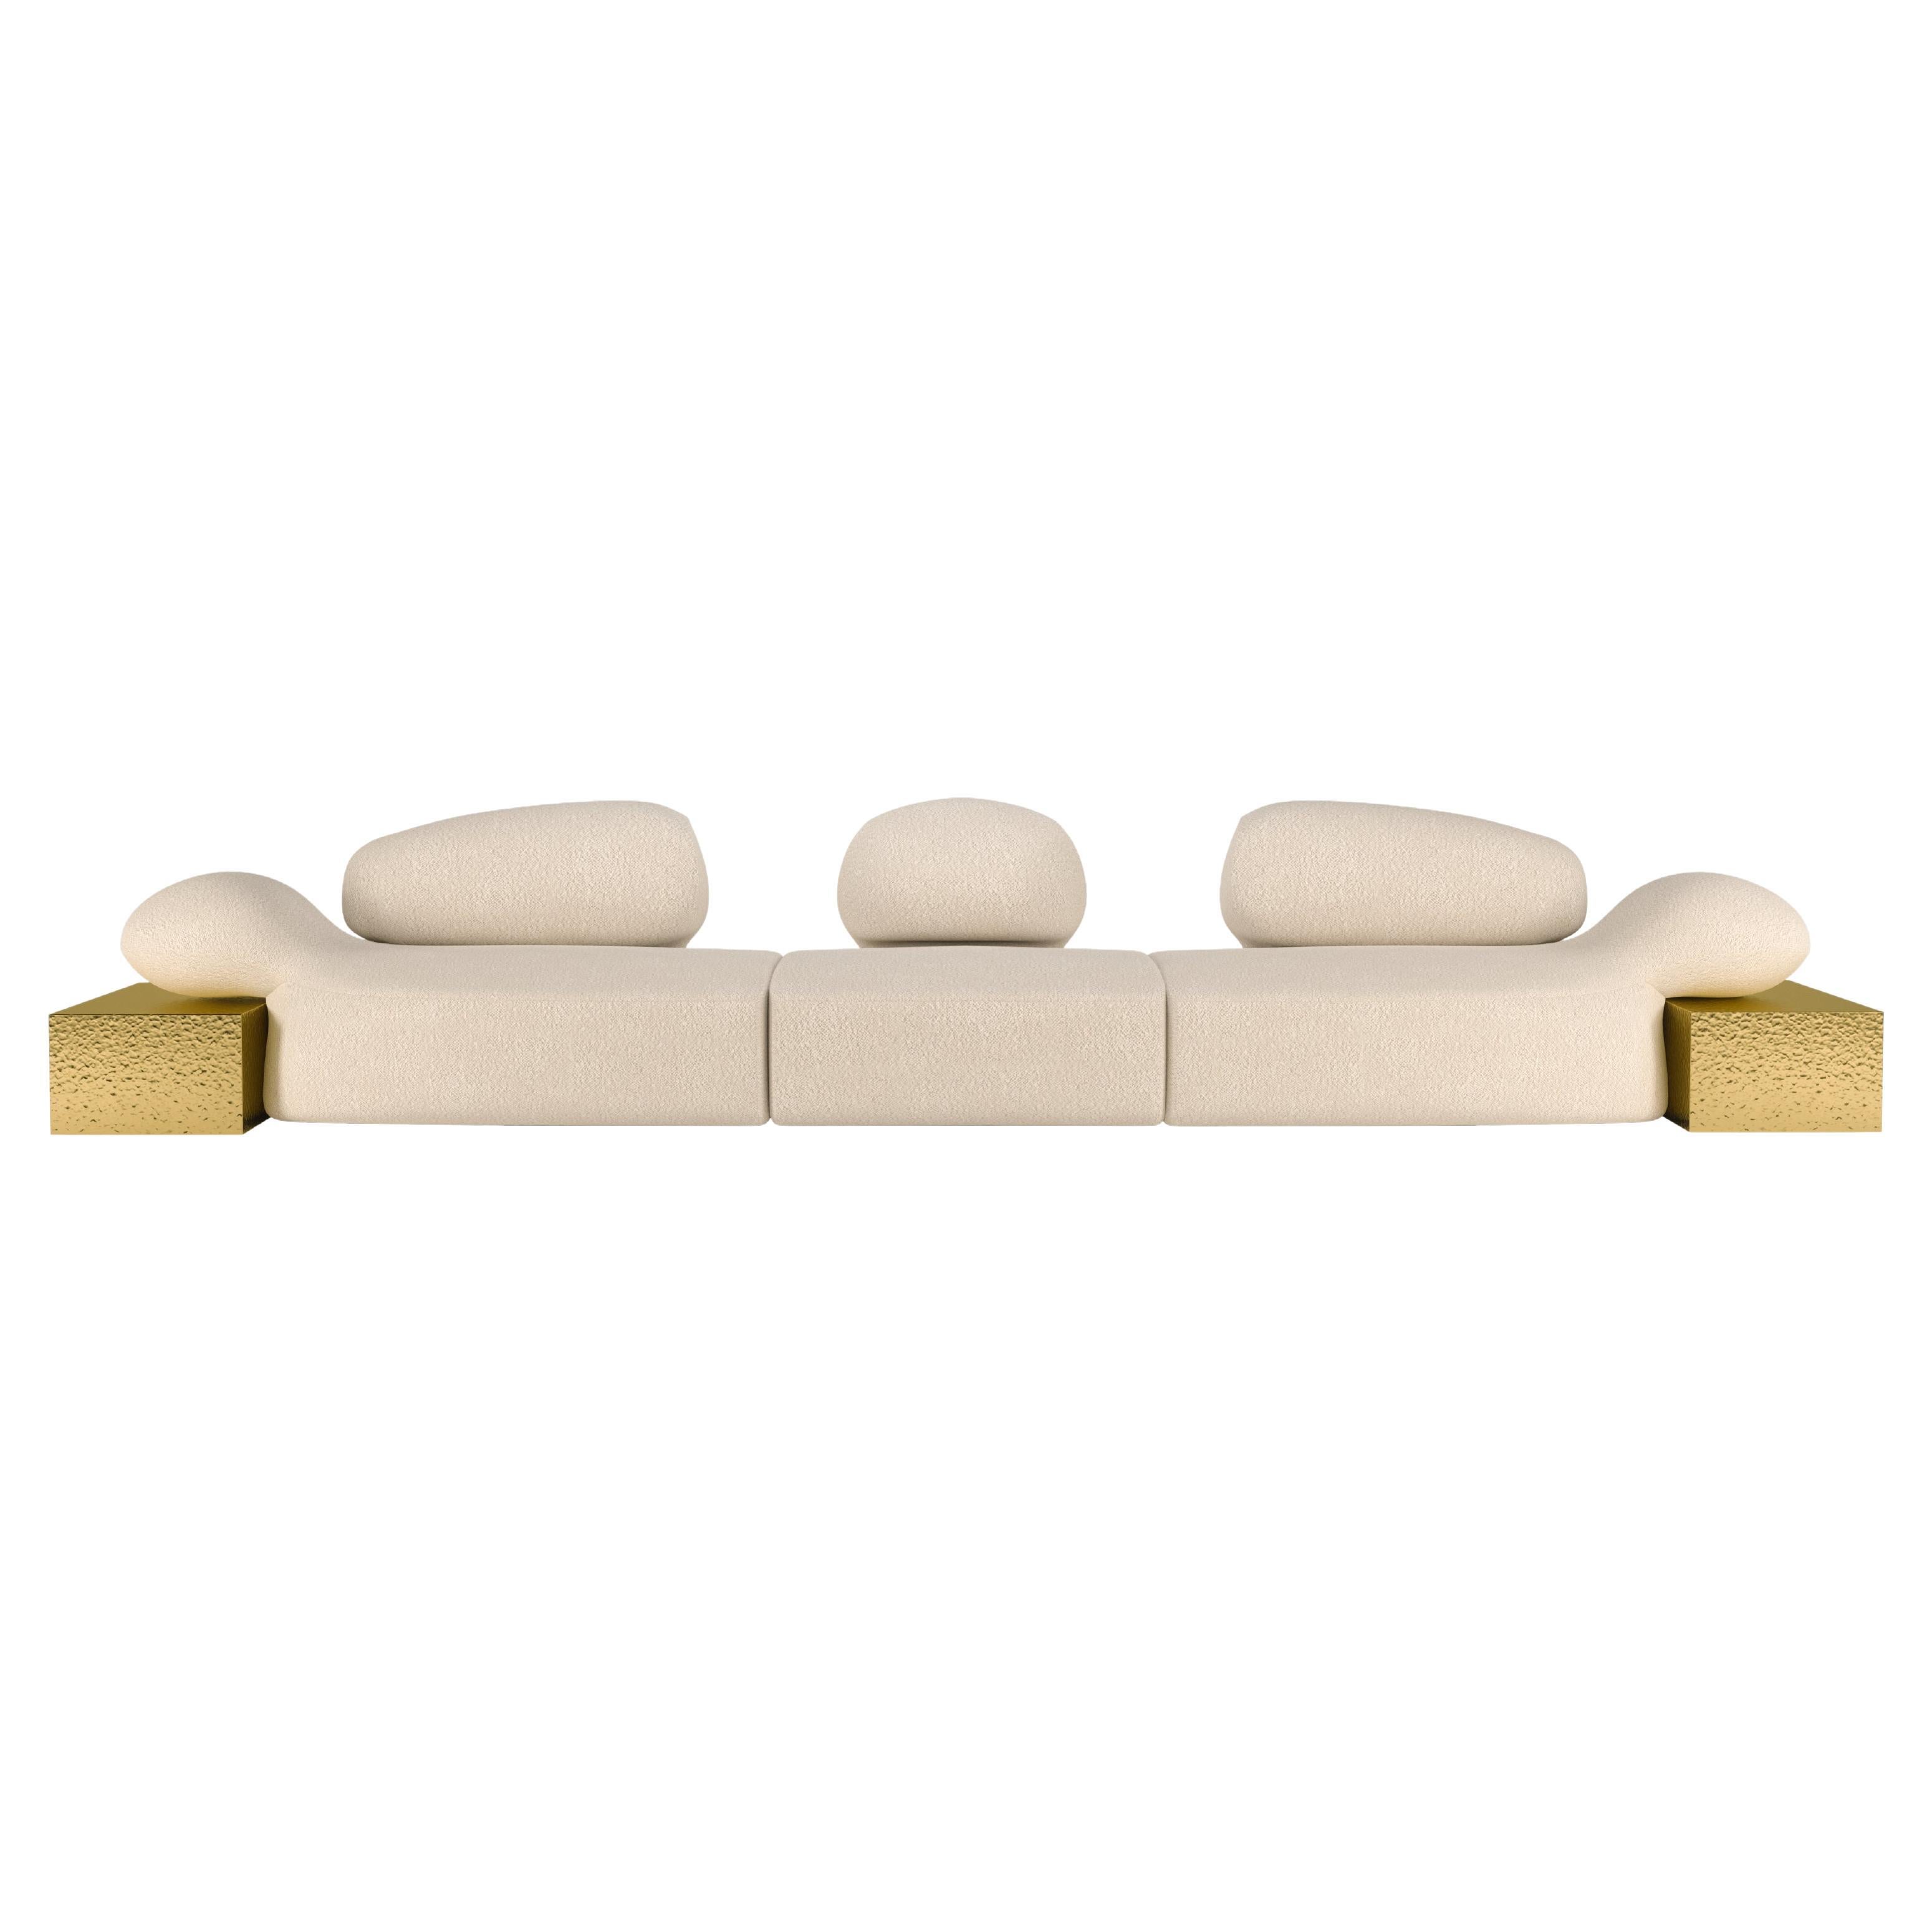 21st Viv Id II Sofa Metlted Hammered Brass and Bouclé